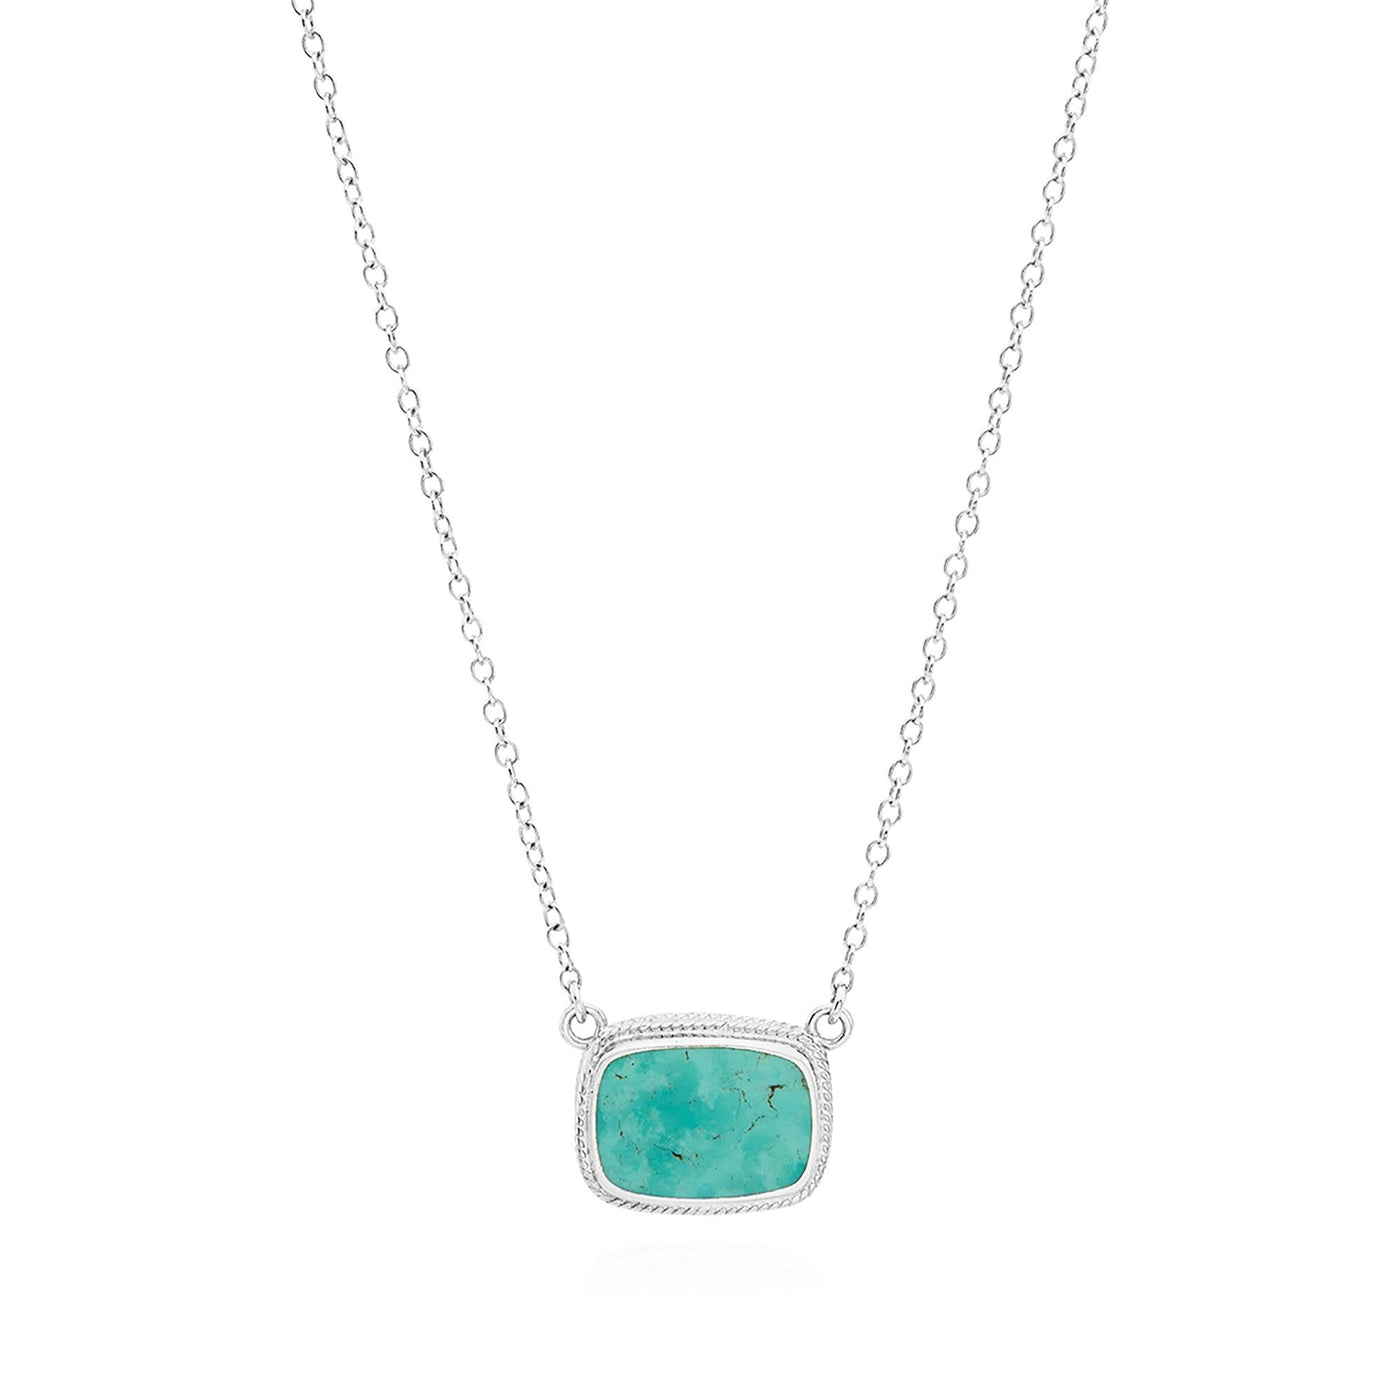 Anna Beck Silver Medium Turquoise Cushion Pendant Necklace - Rococo Jewellery